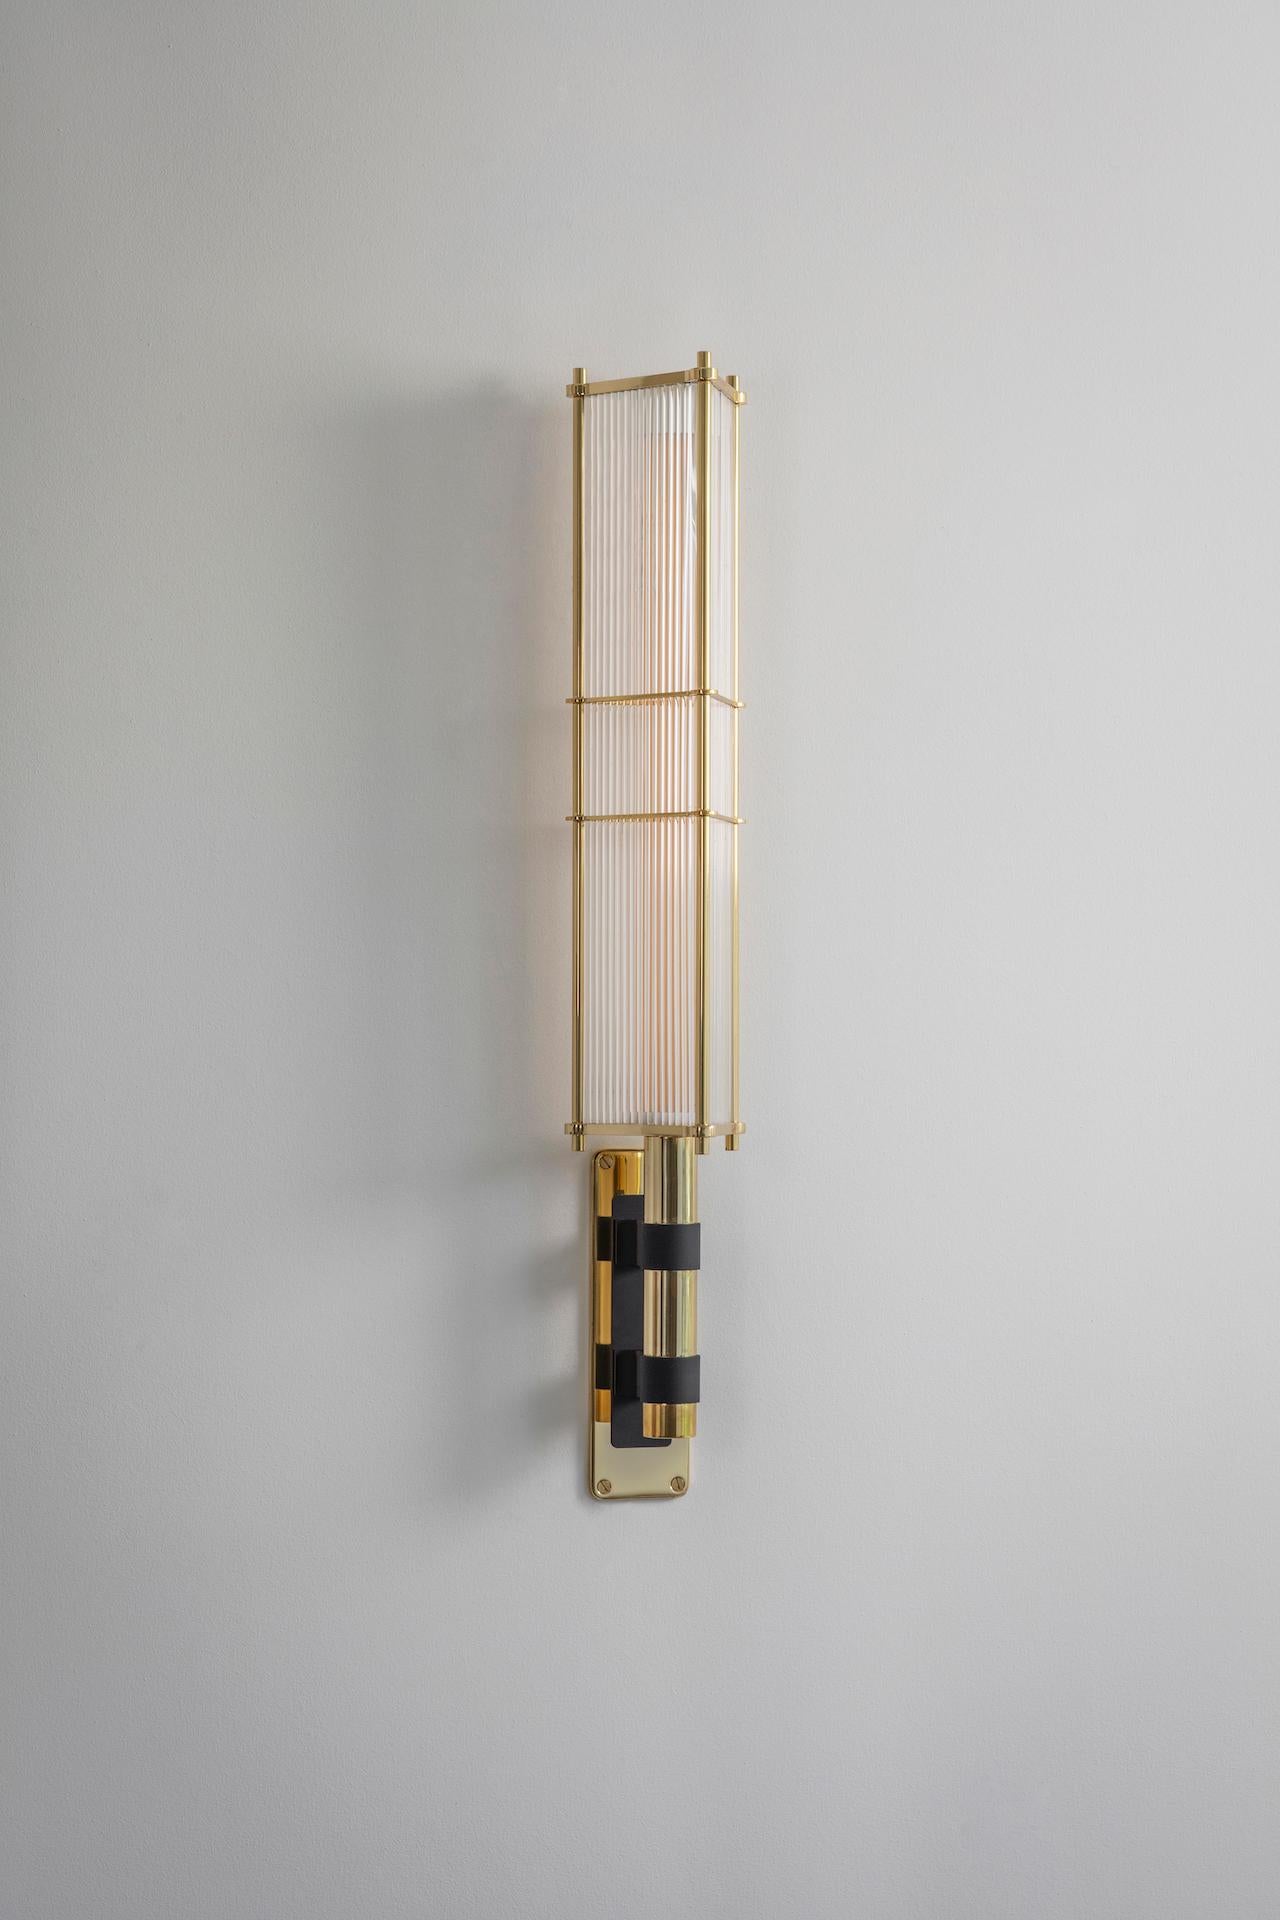 Arbor wall lamp black by Bert Frank
Dimensions: 15 x 16 x H 81 cm
Materials: Brass

Available finishes: Bronzed brass, black brass
All our lamps can be wired according to each country. If sold to the USA it will be wired for the USA for